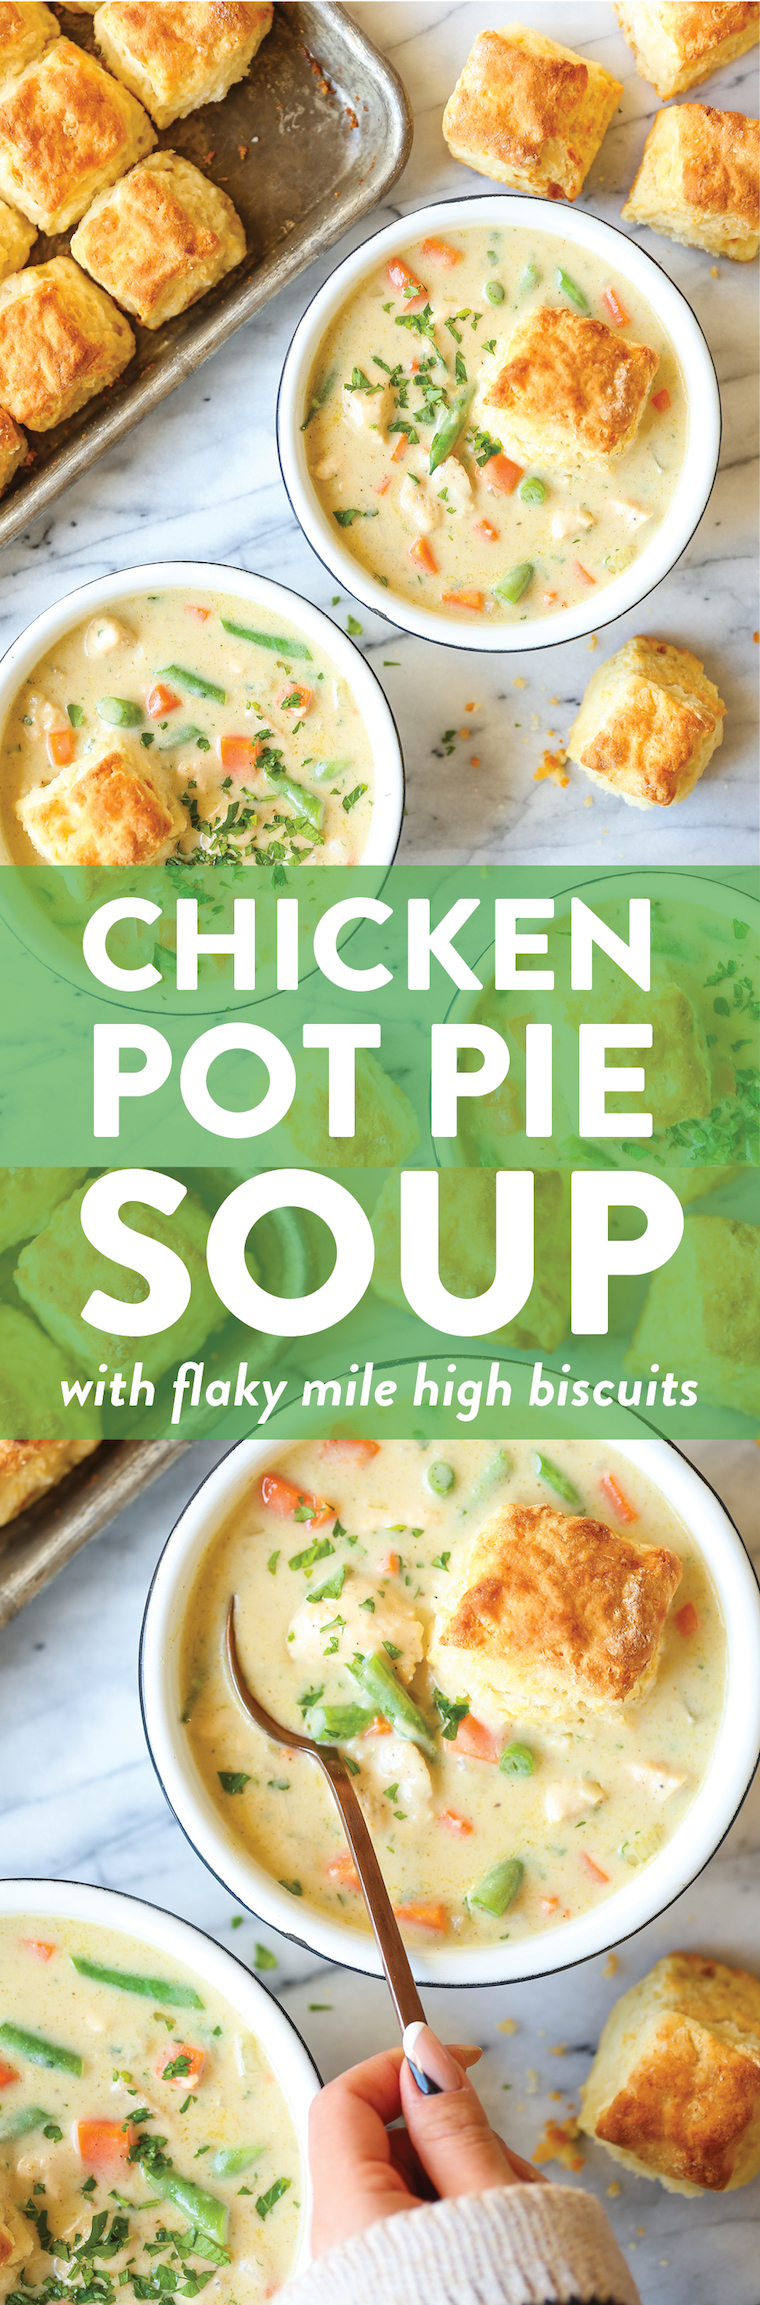 Chicken Pot Pie Soup - Everyone's favorite pot pie in soup form! Simple to make and so so cozy and comforting! Serve with warm biscuits for a complete meal!